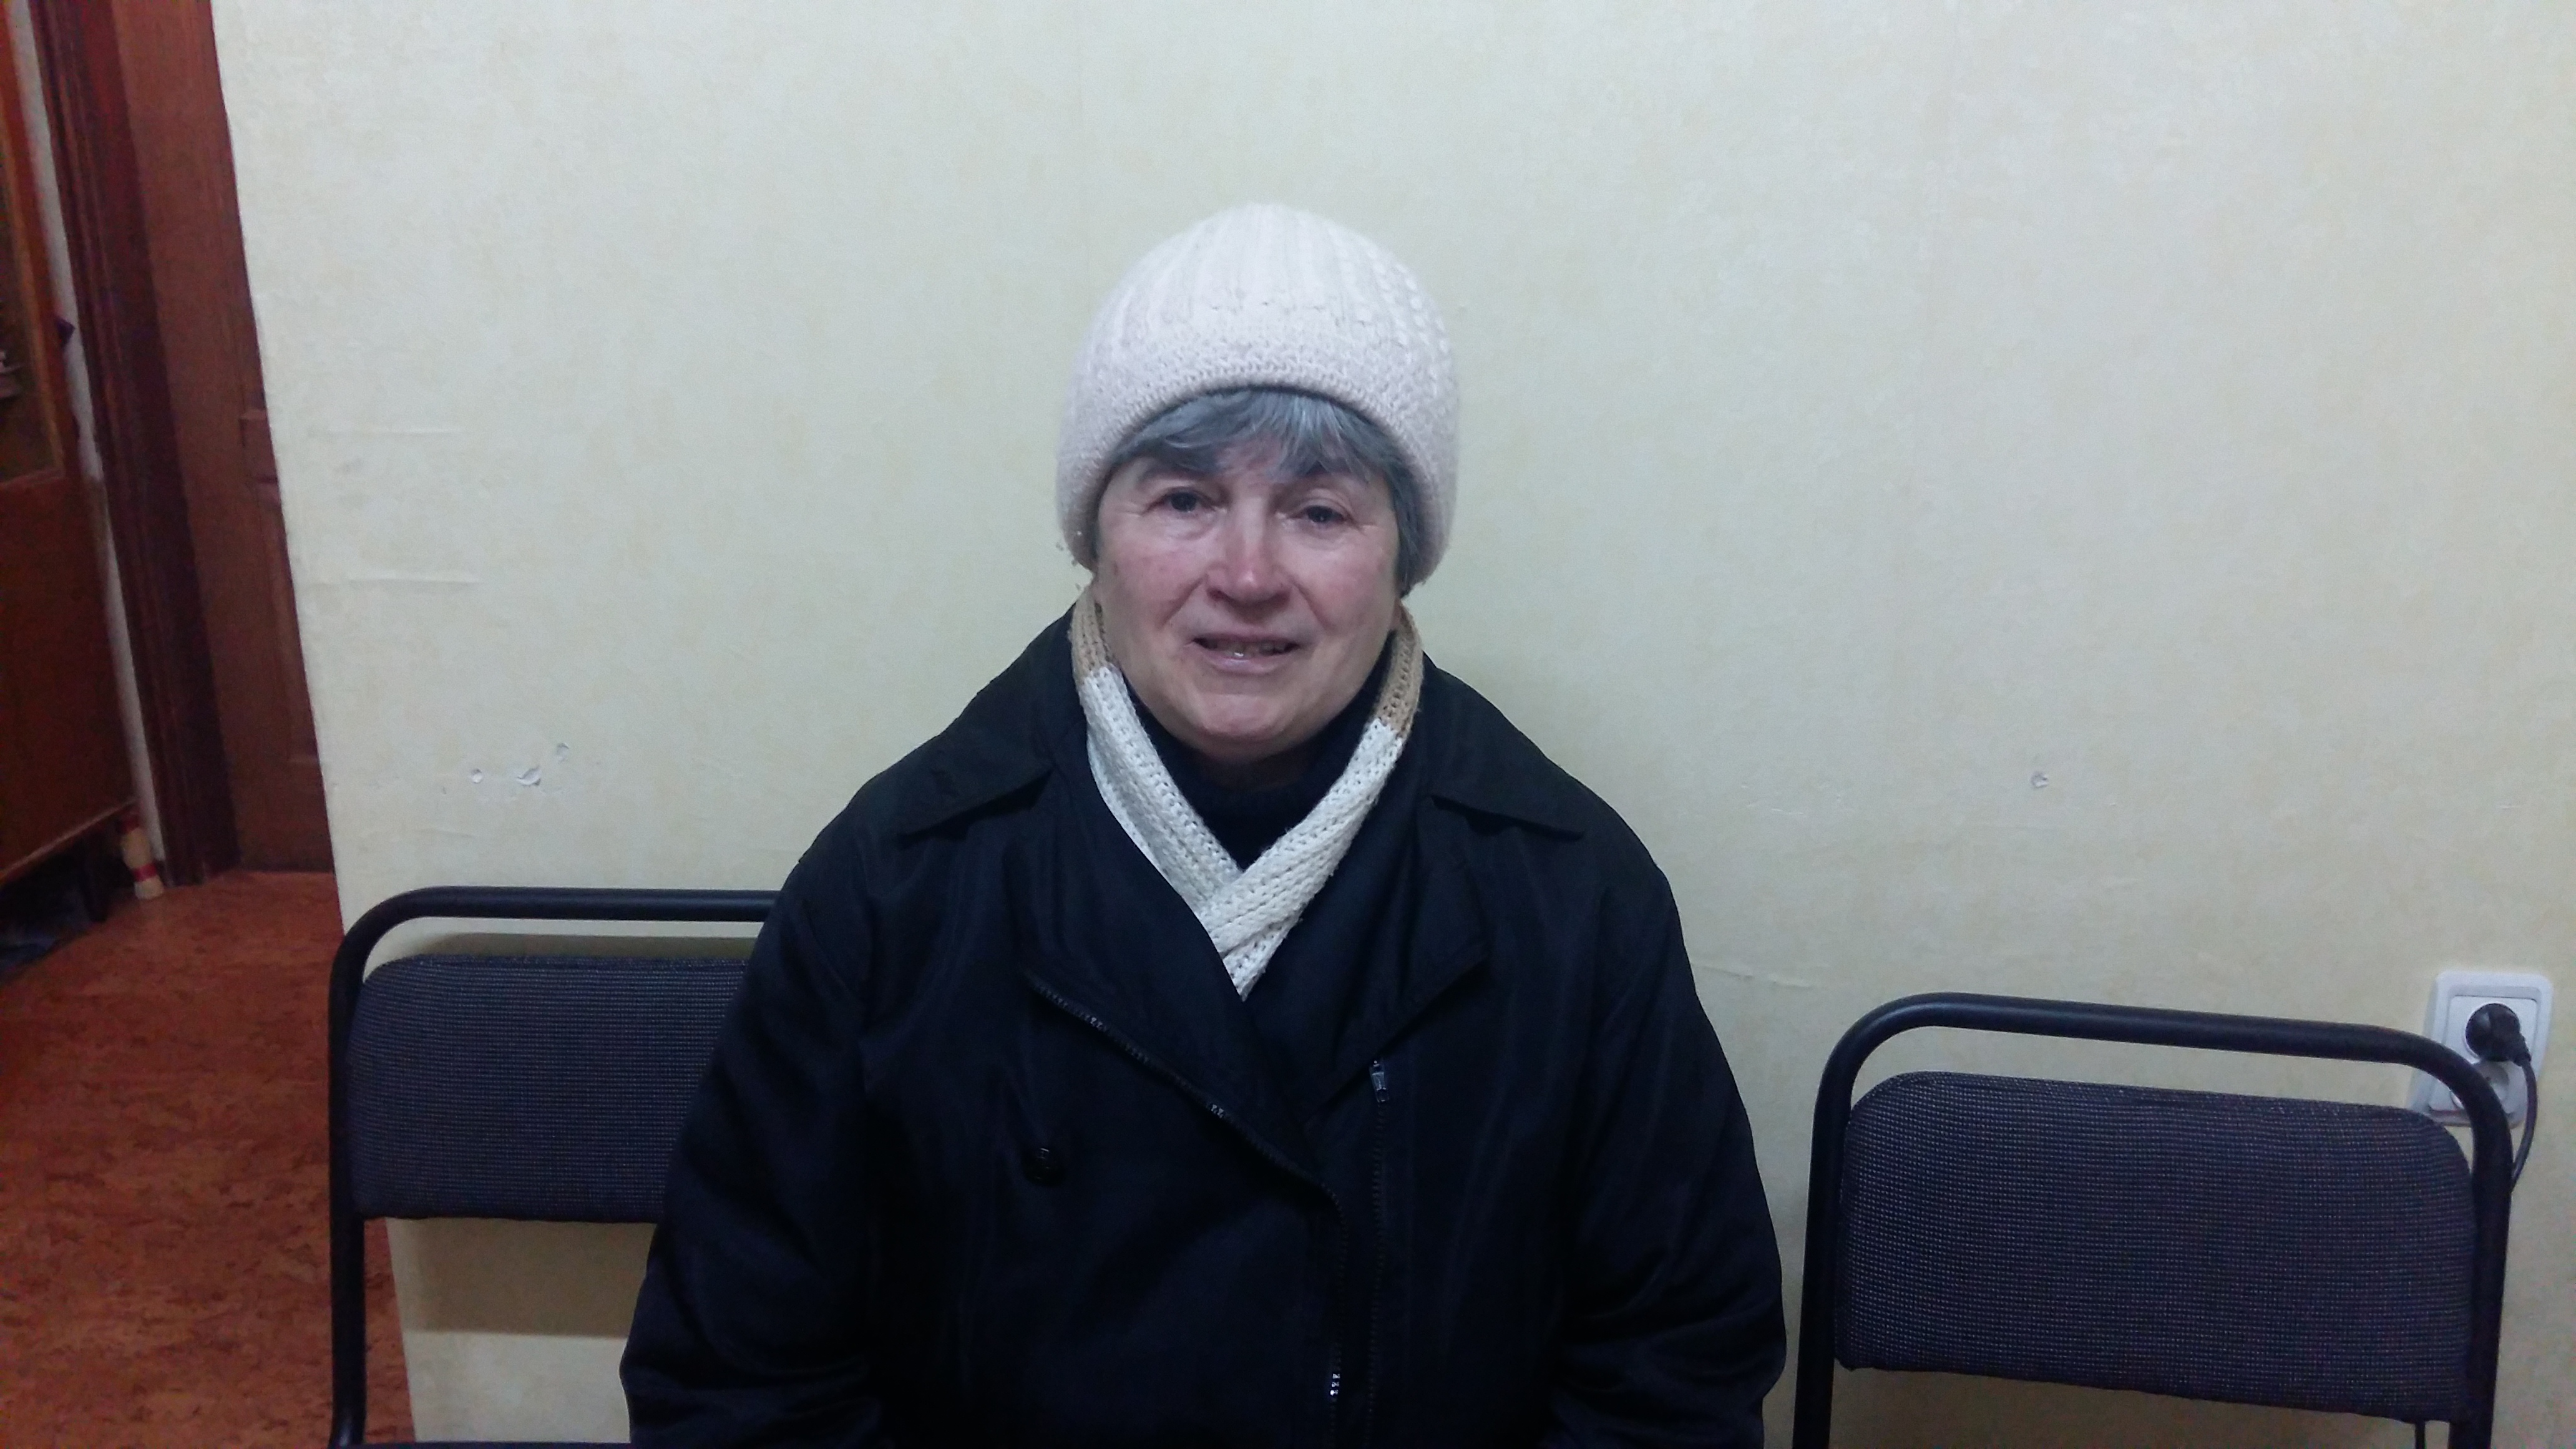 Ukrainian Refugee Says “Thank You” for Help with Cancer Treatment